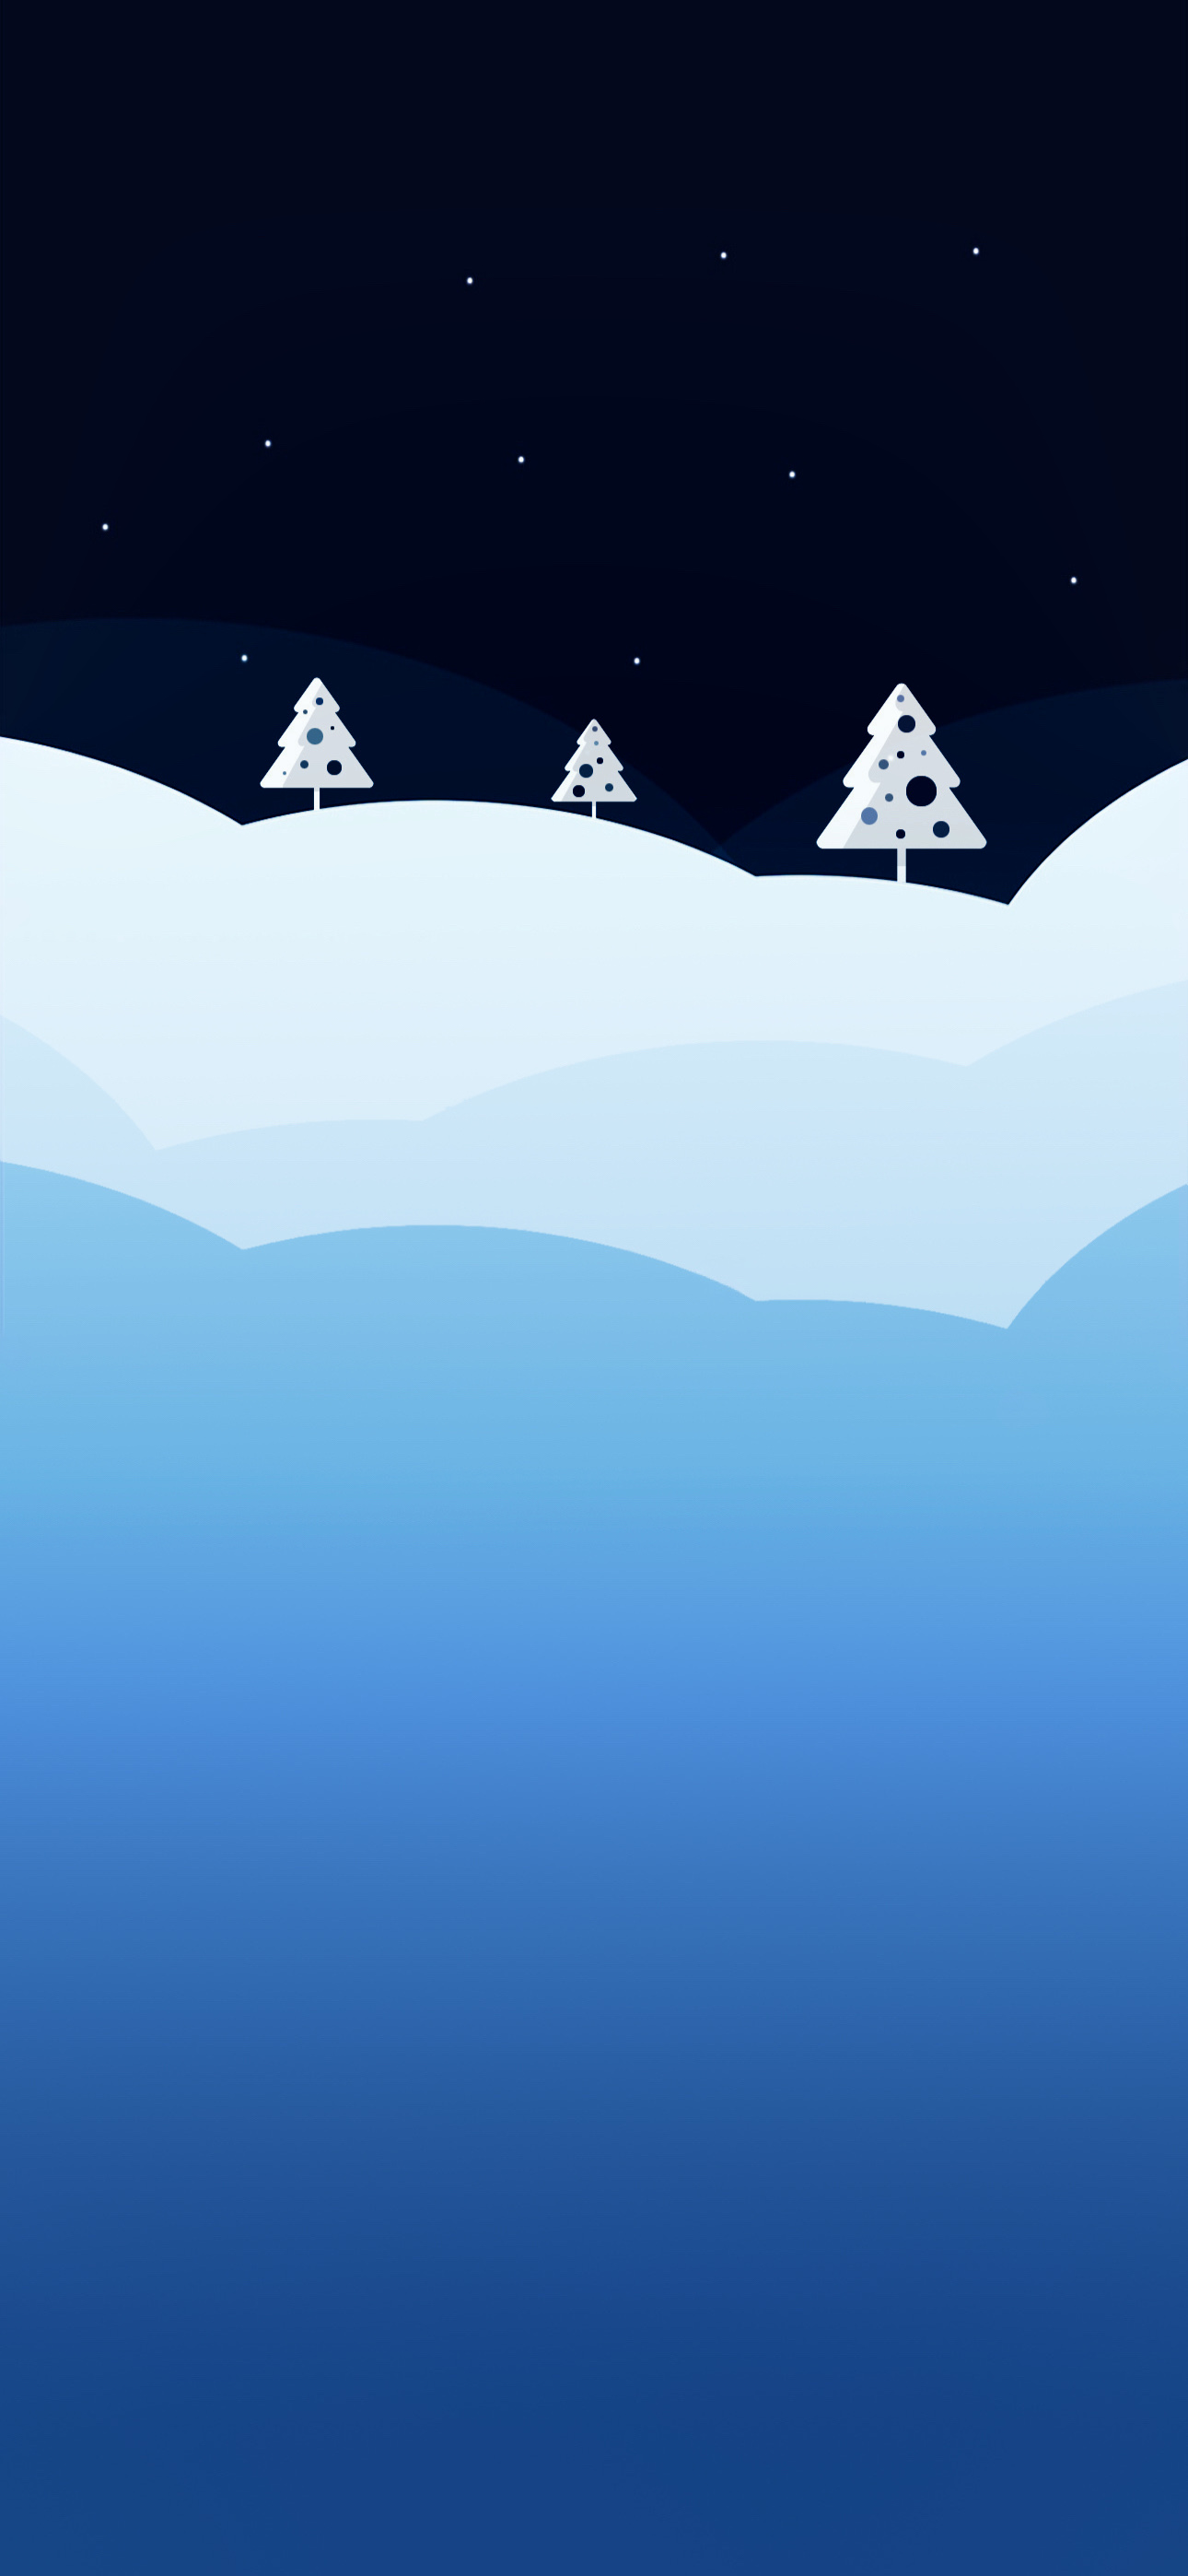 Minimal, snowy Winter wallpaper pack for iPhone